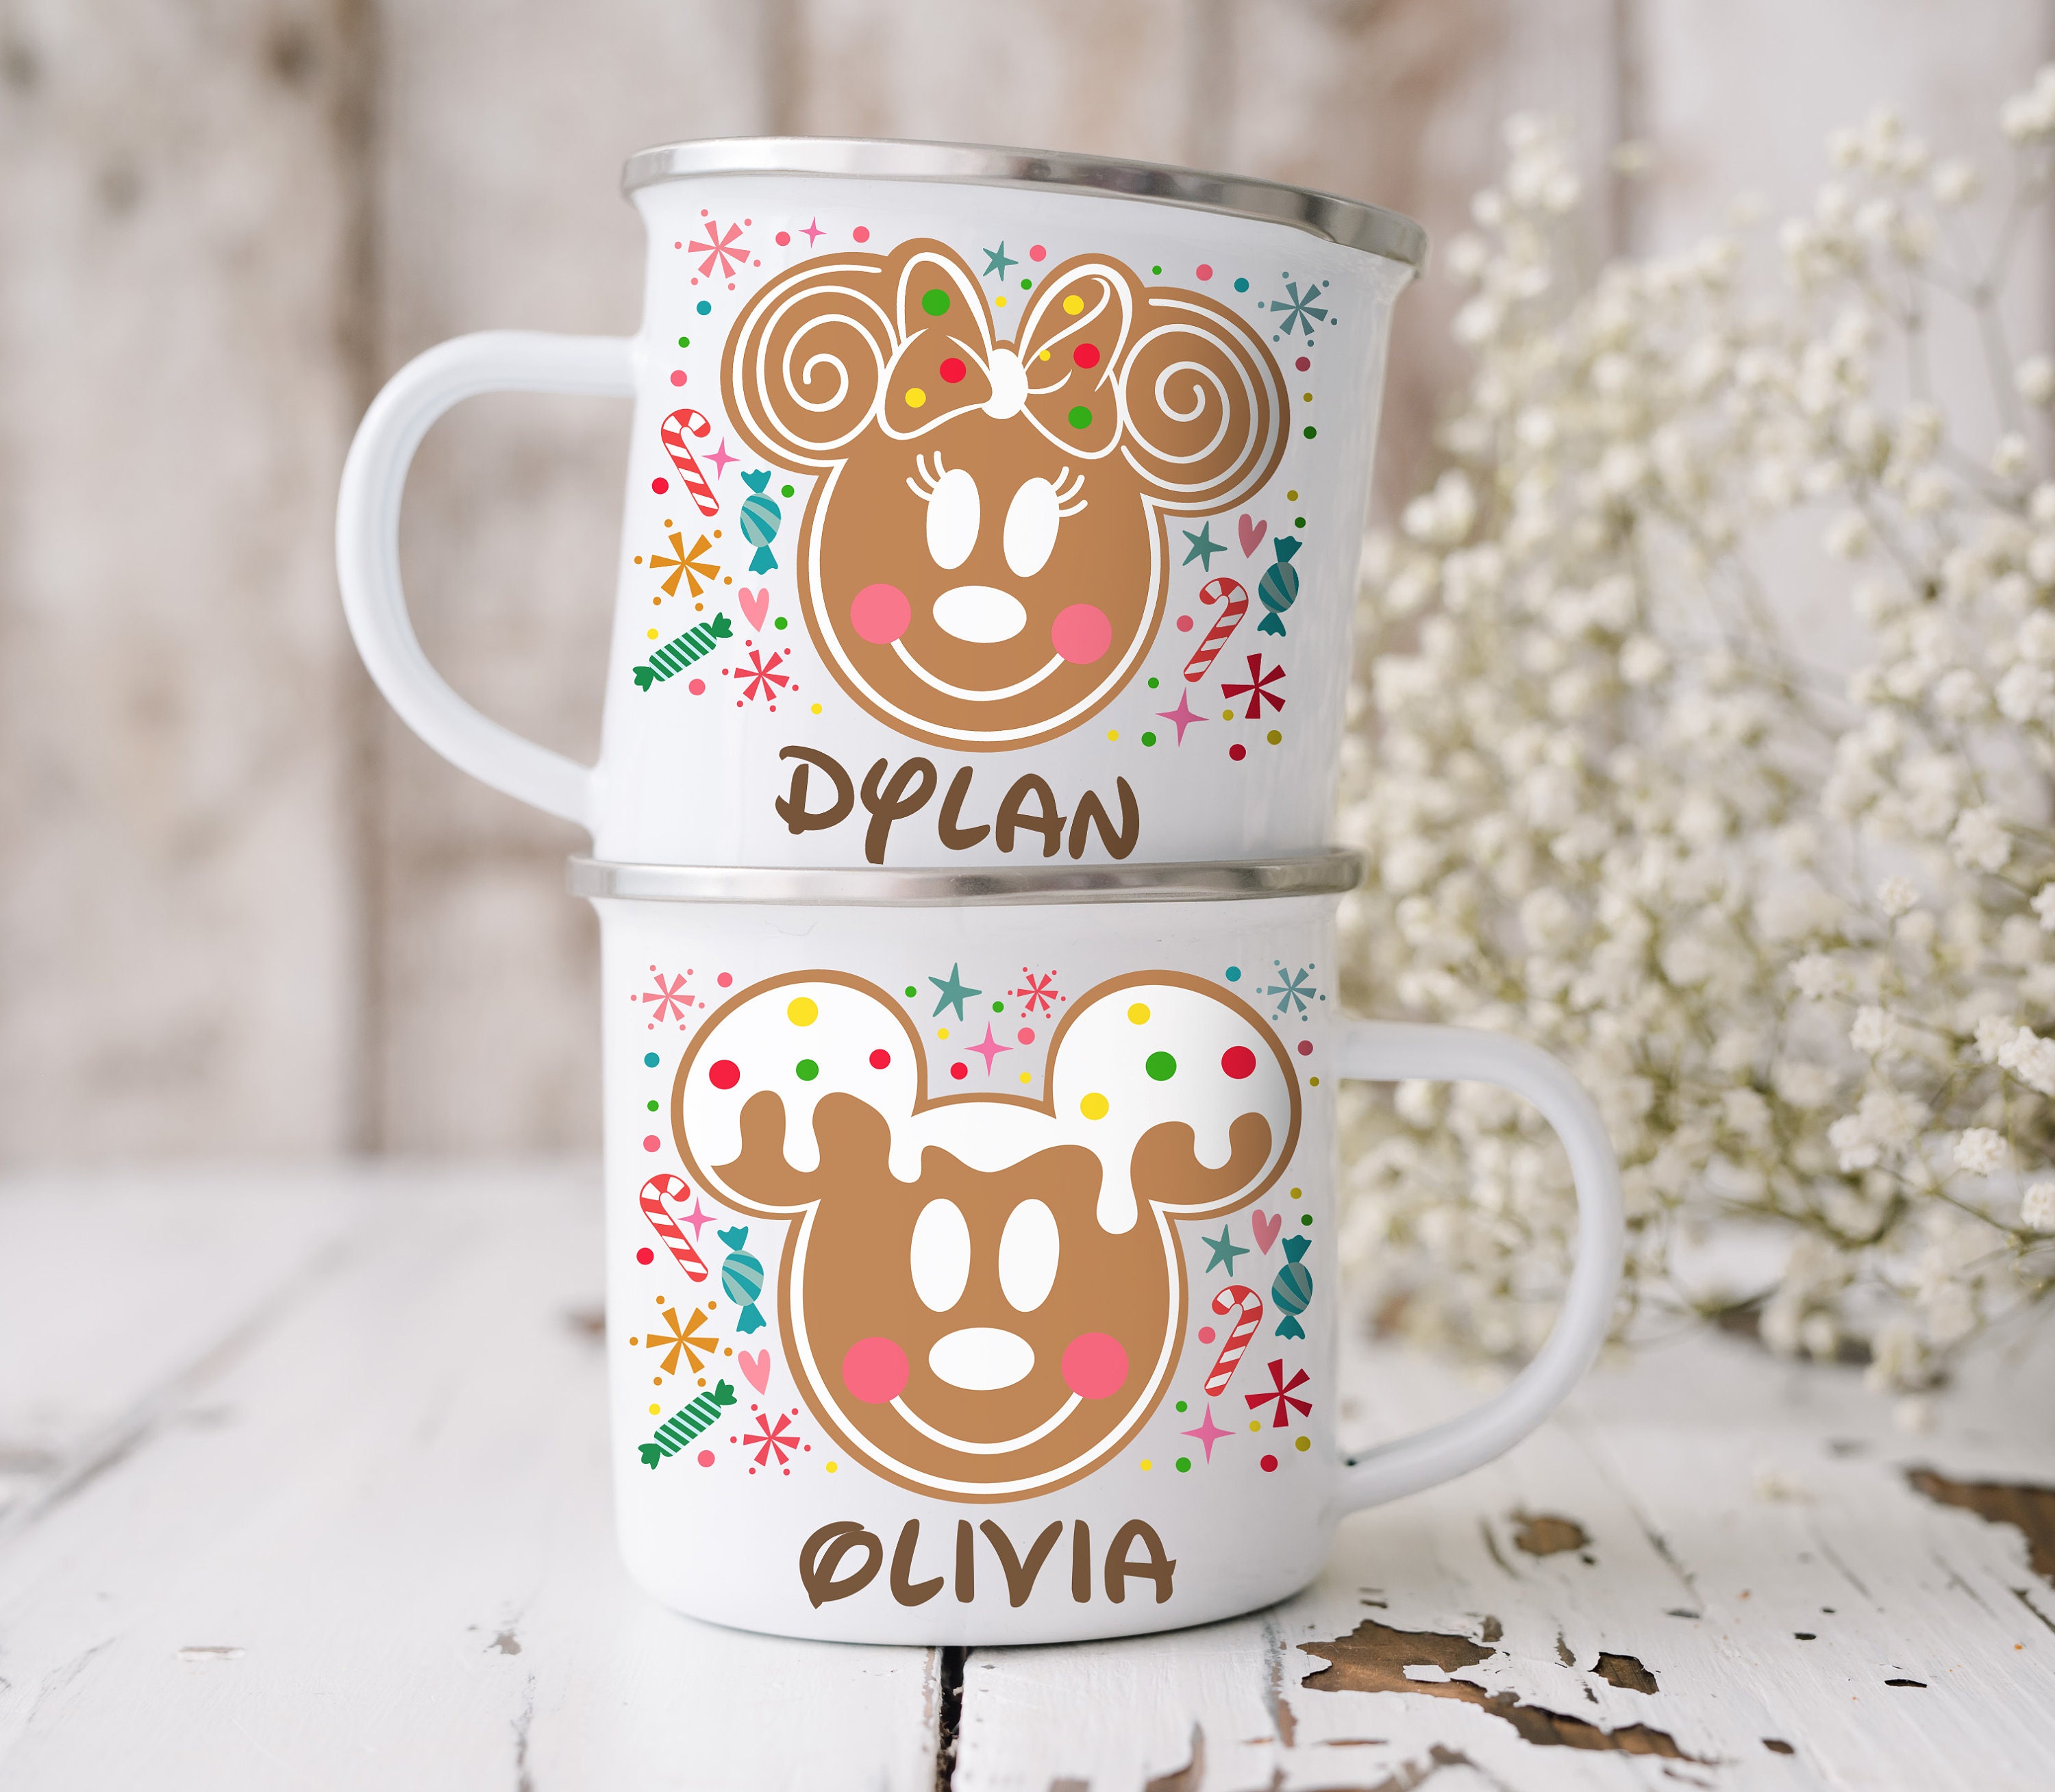 Disney Mickey and Minnie Mouse Christmas Mugs Coffee Cups Kitchen Accessories | Cute Ceramic Festive Housewarming Gifts for Men and Women and Kids 